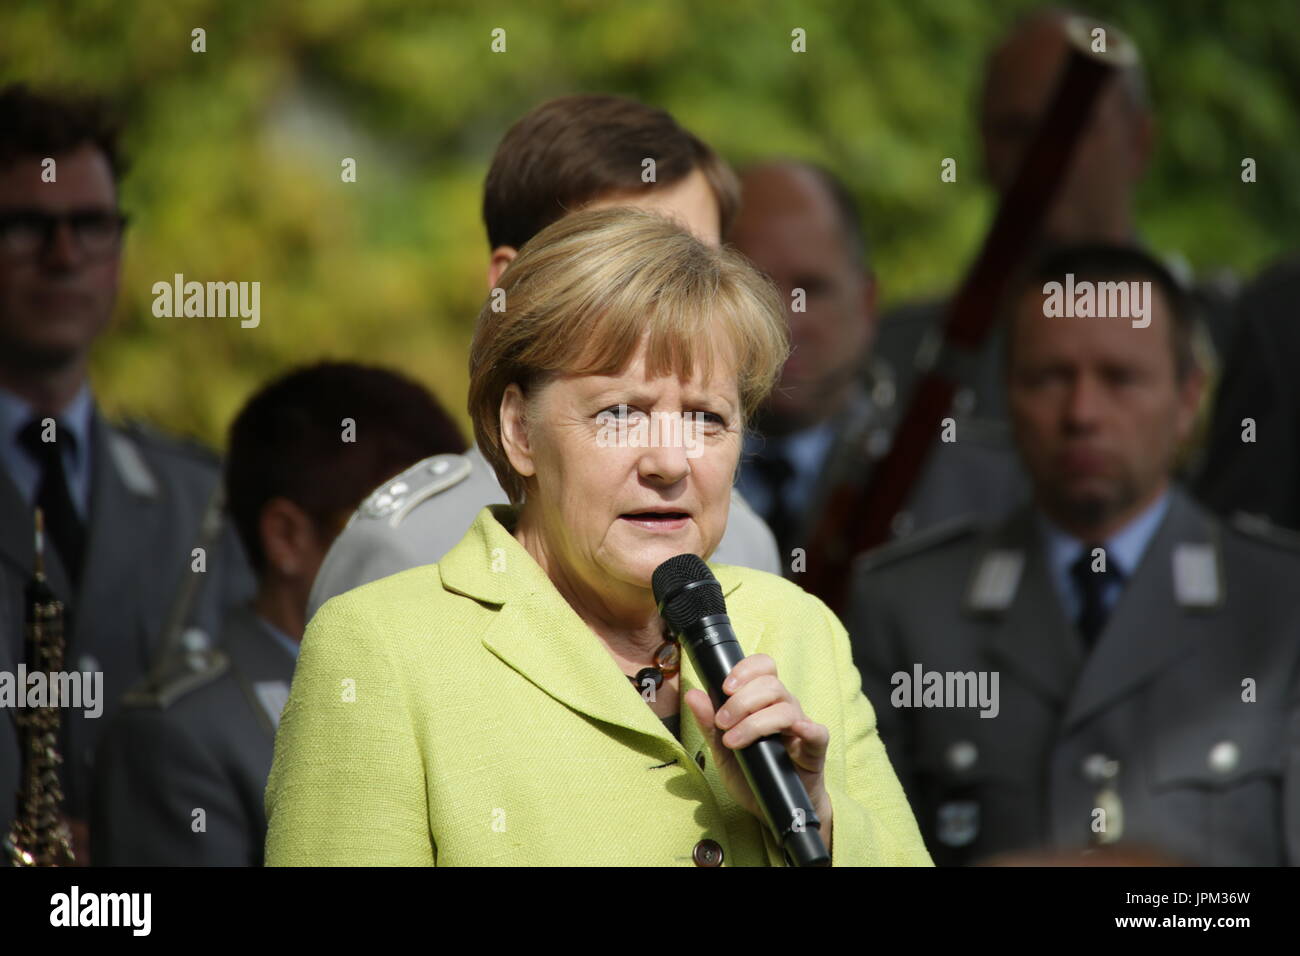 Berlin, Germany, 31st August, 2014: Chancellor Angela Merkel welcomes visitors to open day Chancellery. Stock Photo